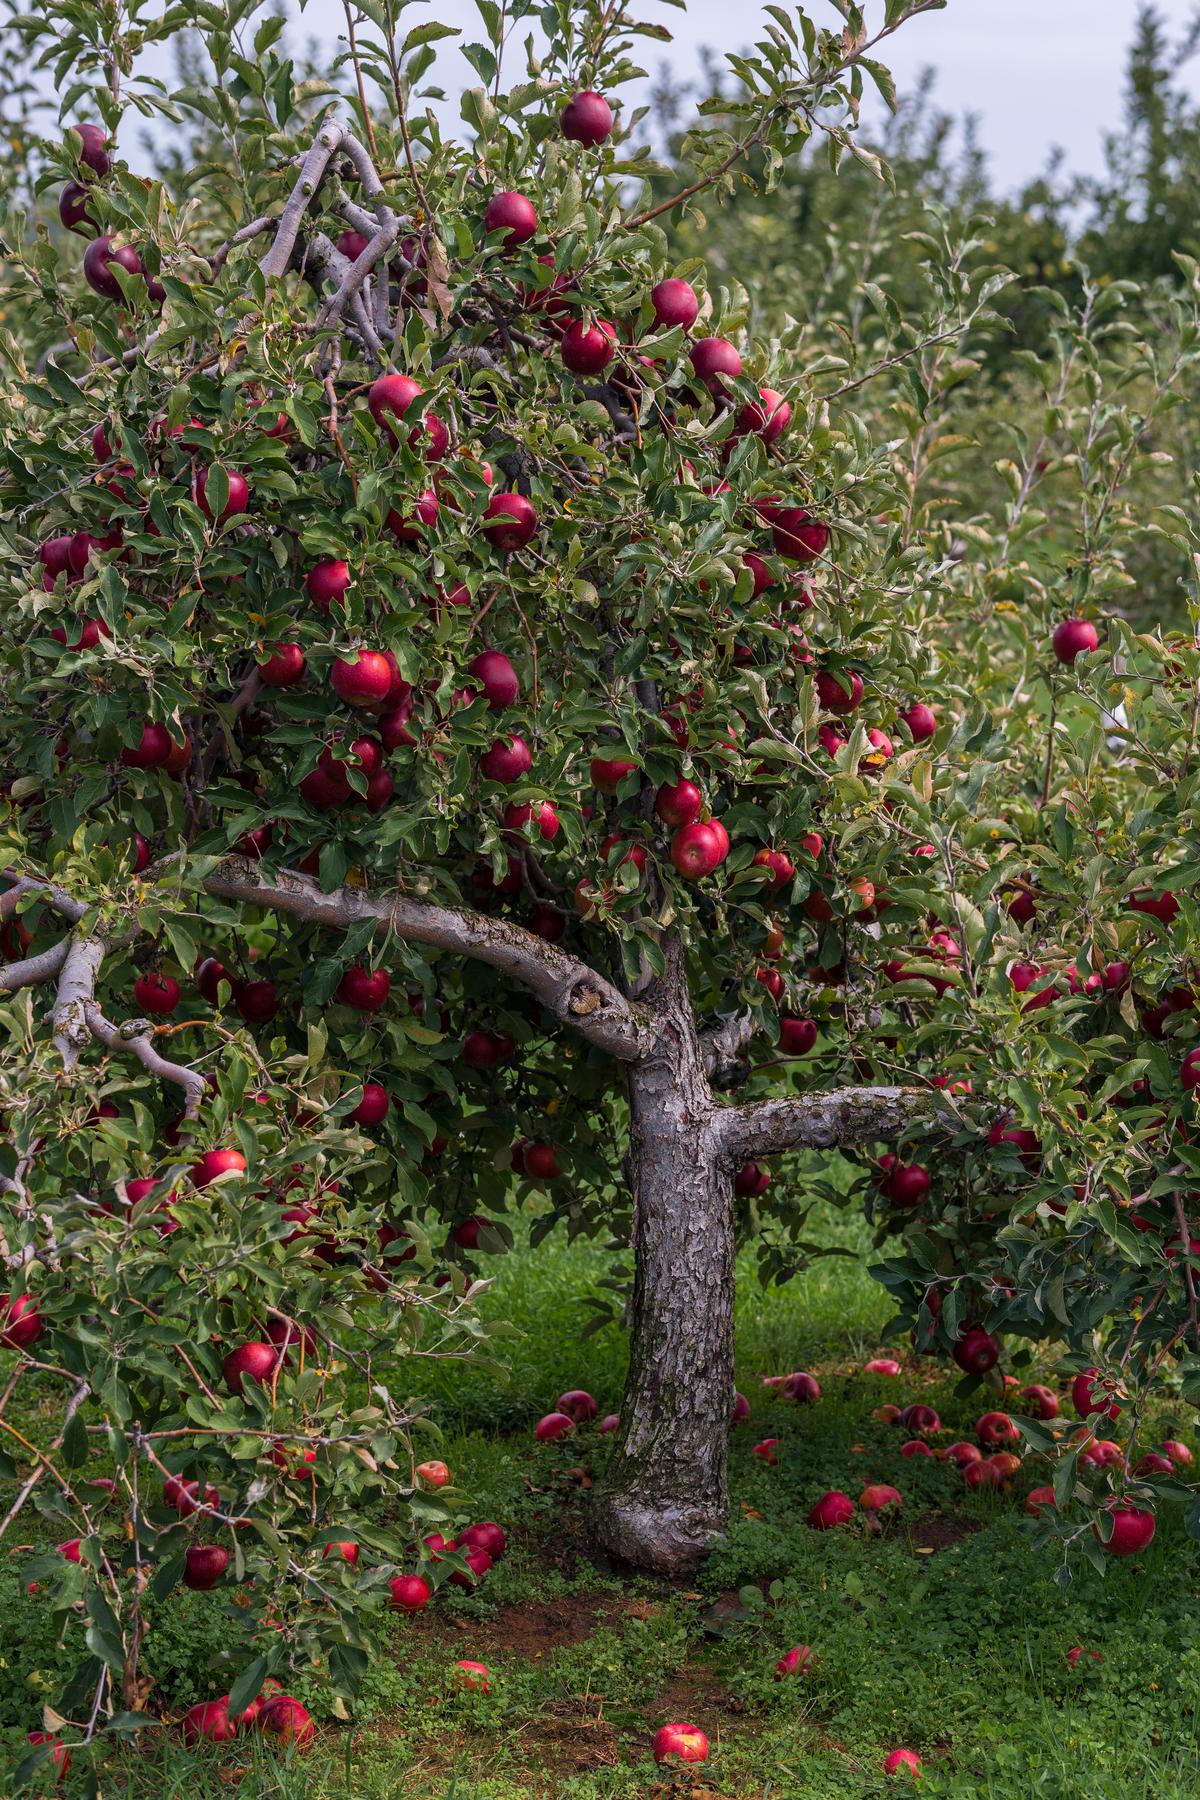 An image of a well-pruned apple tree with vibrant green leaves and ripe red apples hanging from its branches.